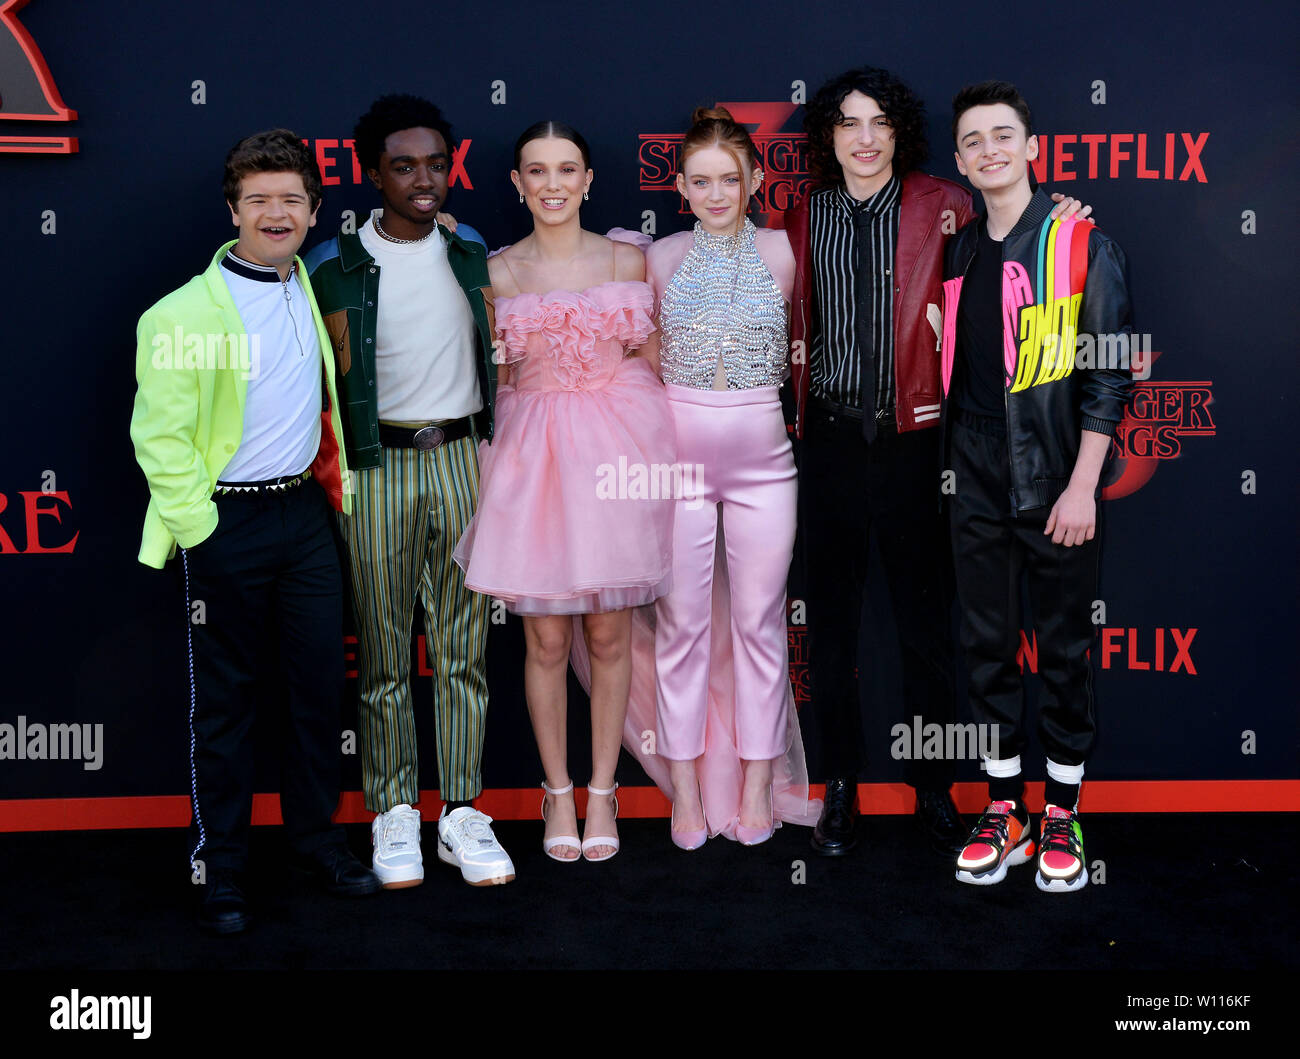 Sadie Sink attending Netflix's Stranger Things 2 Premiere Event Stock Photo  - Alamy